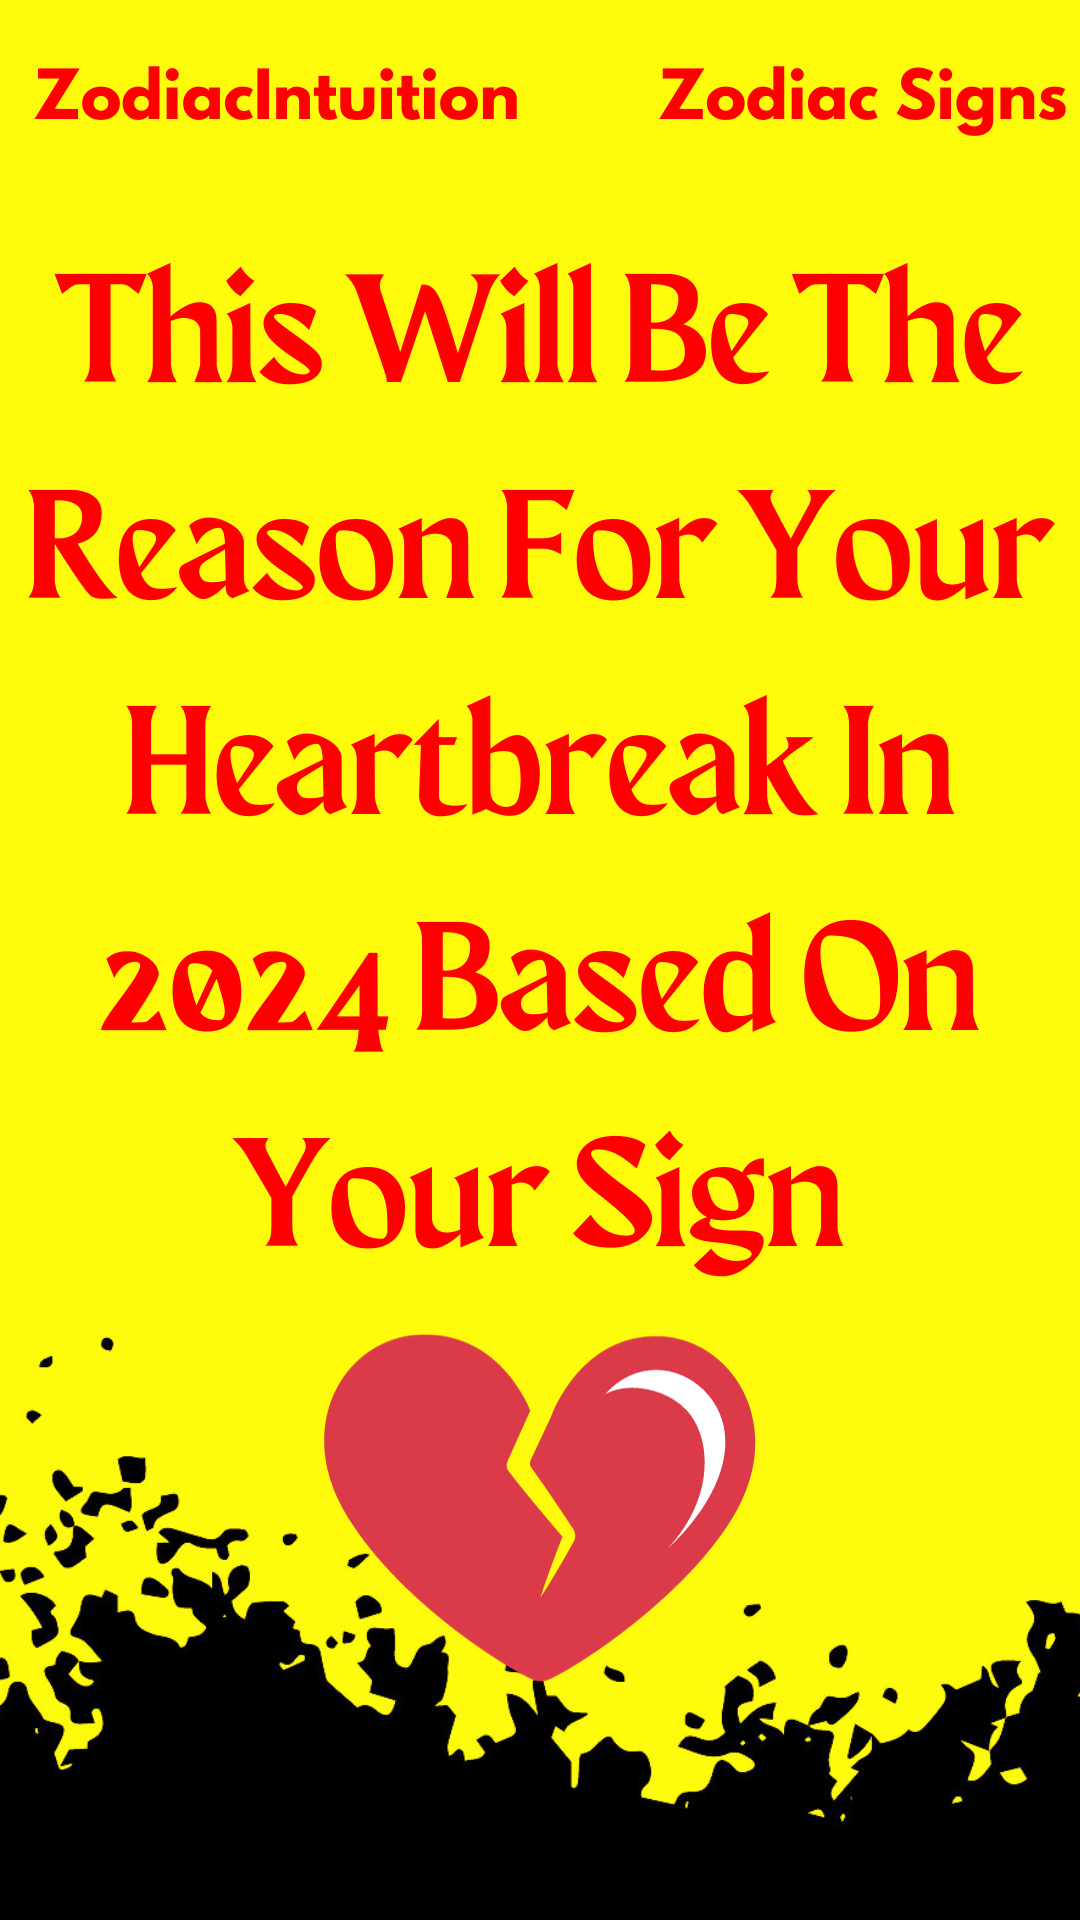 This Will Be The Reason For Your Heartbreak In 2024 Based On Your Sign